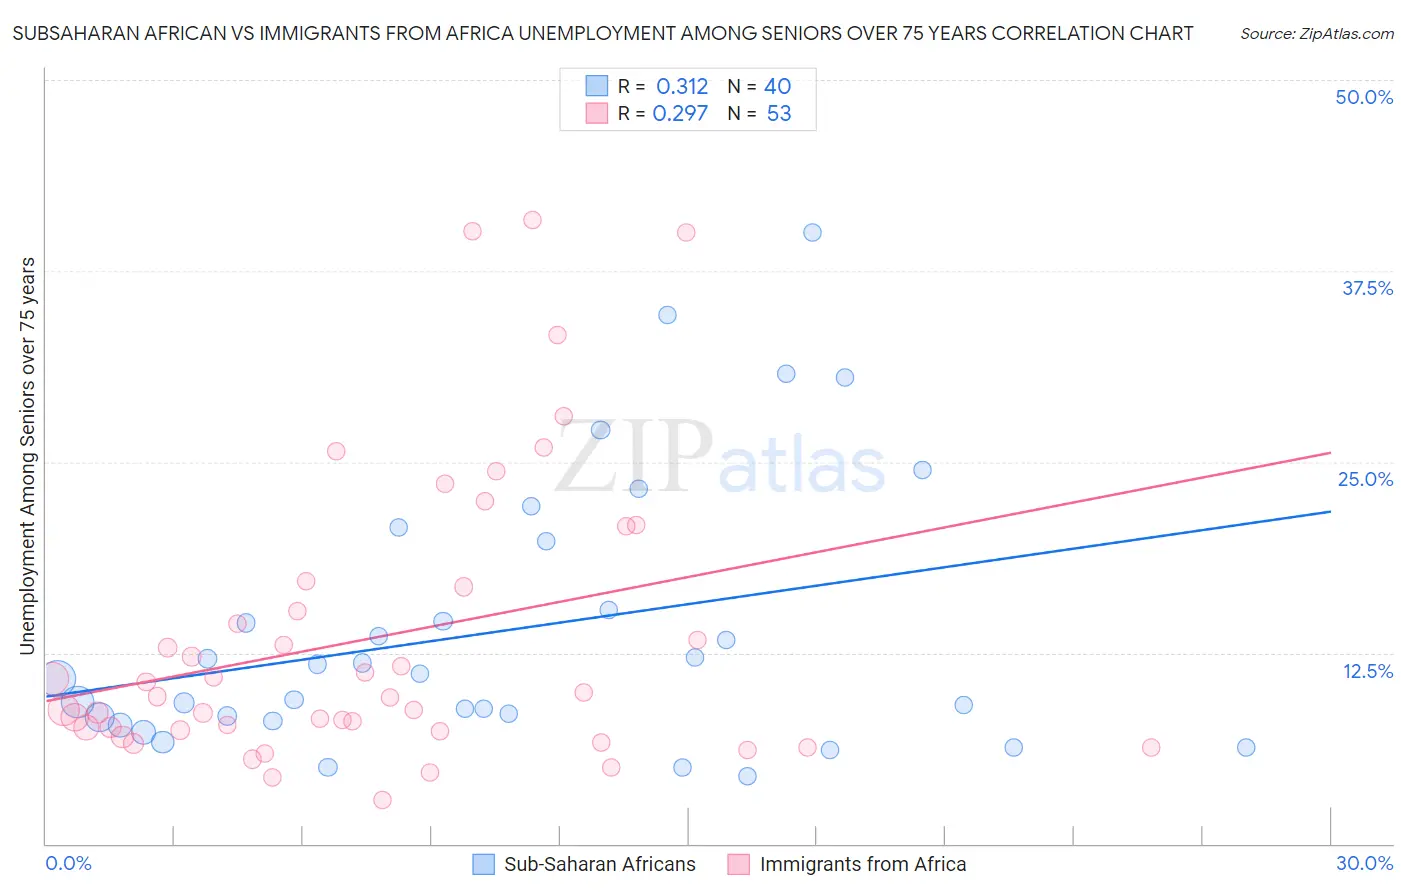 Subsaharan African vs Immigrants from Africa Unemployment Among Seniors over 75 years